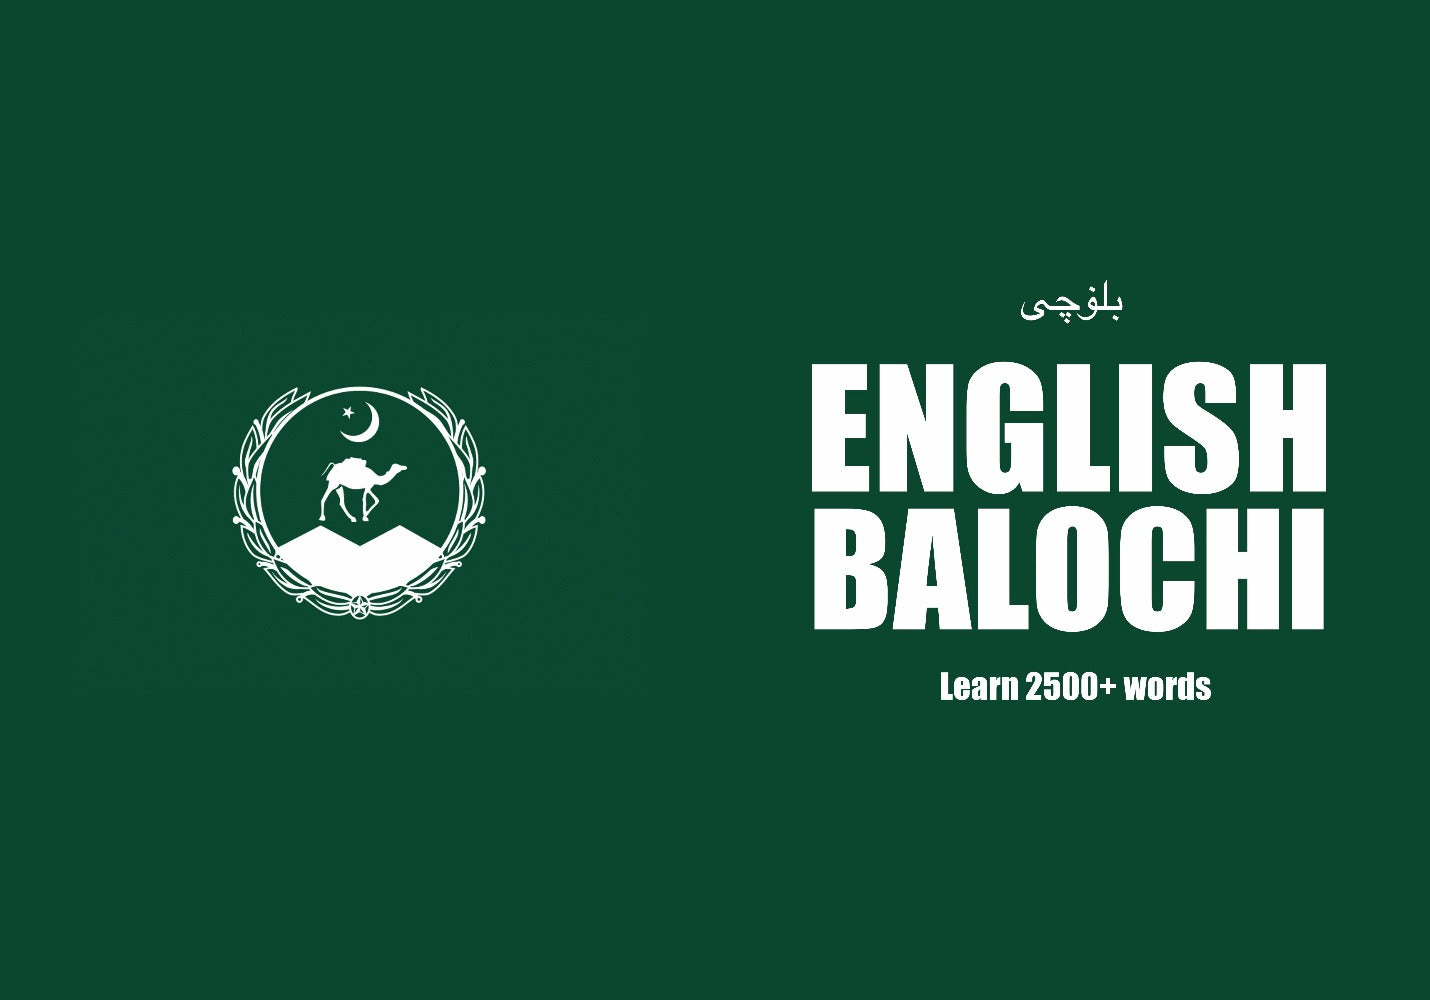 Balochi language learning notebook cover